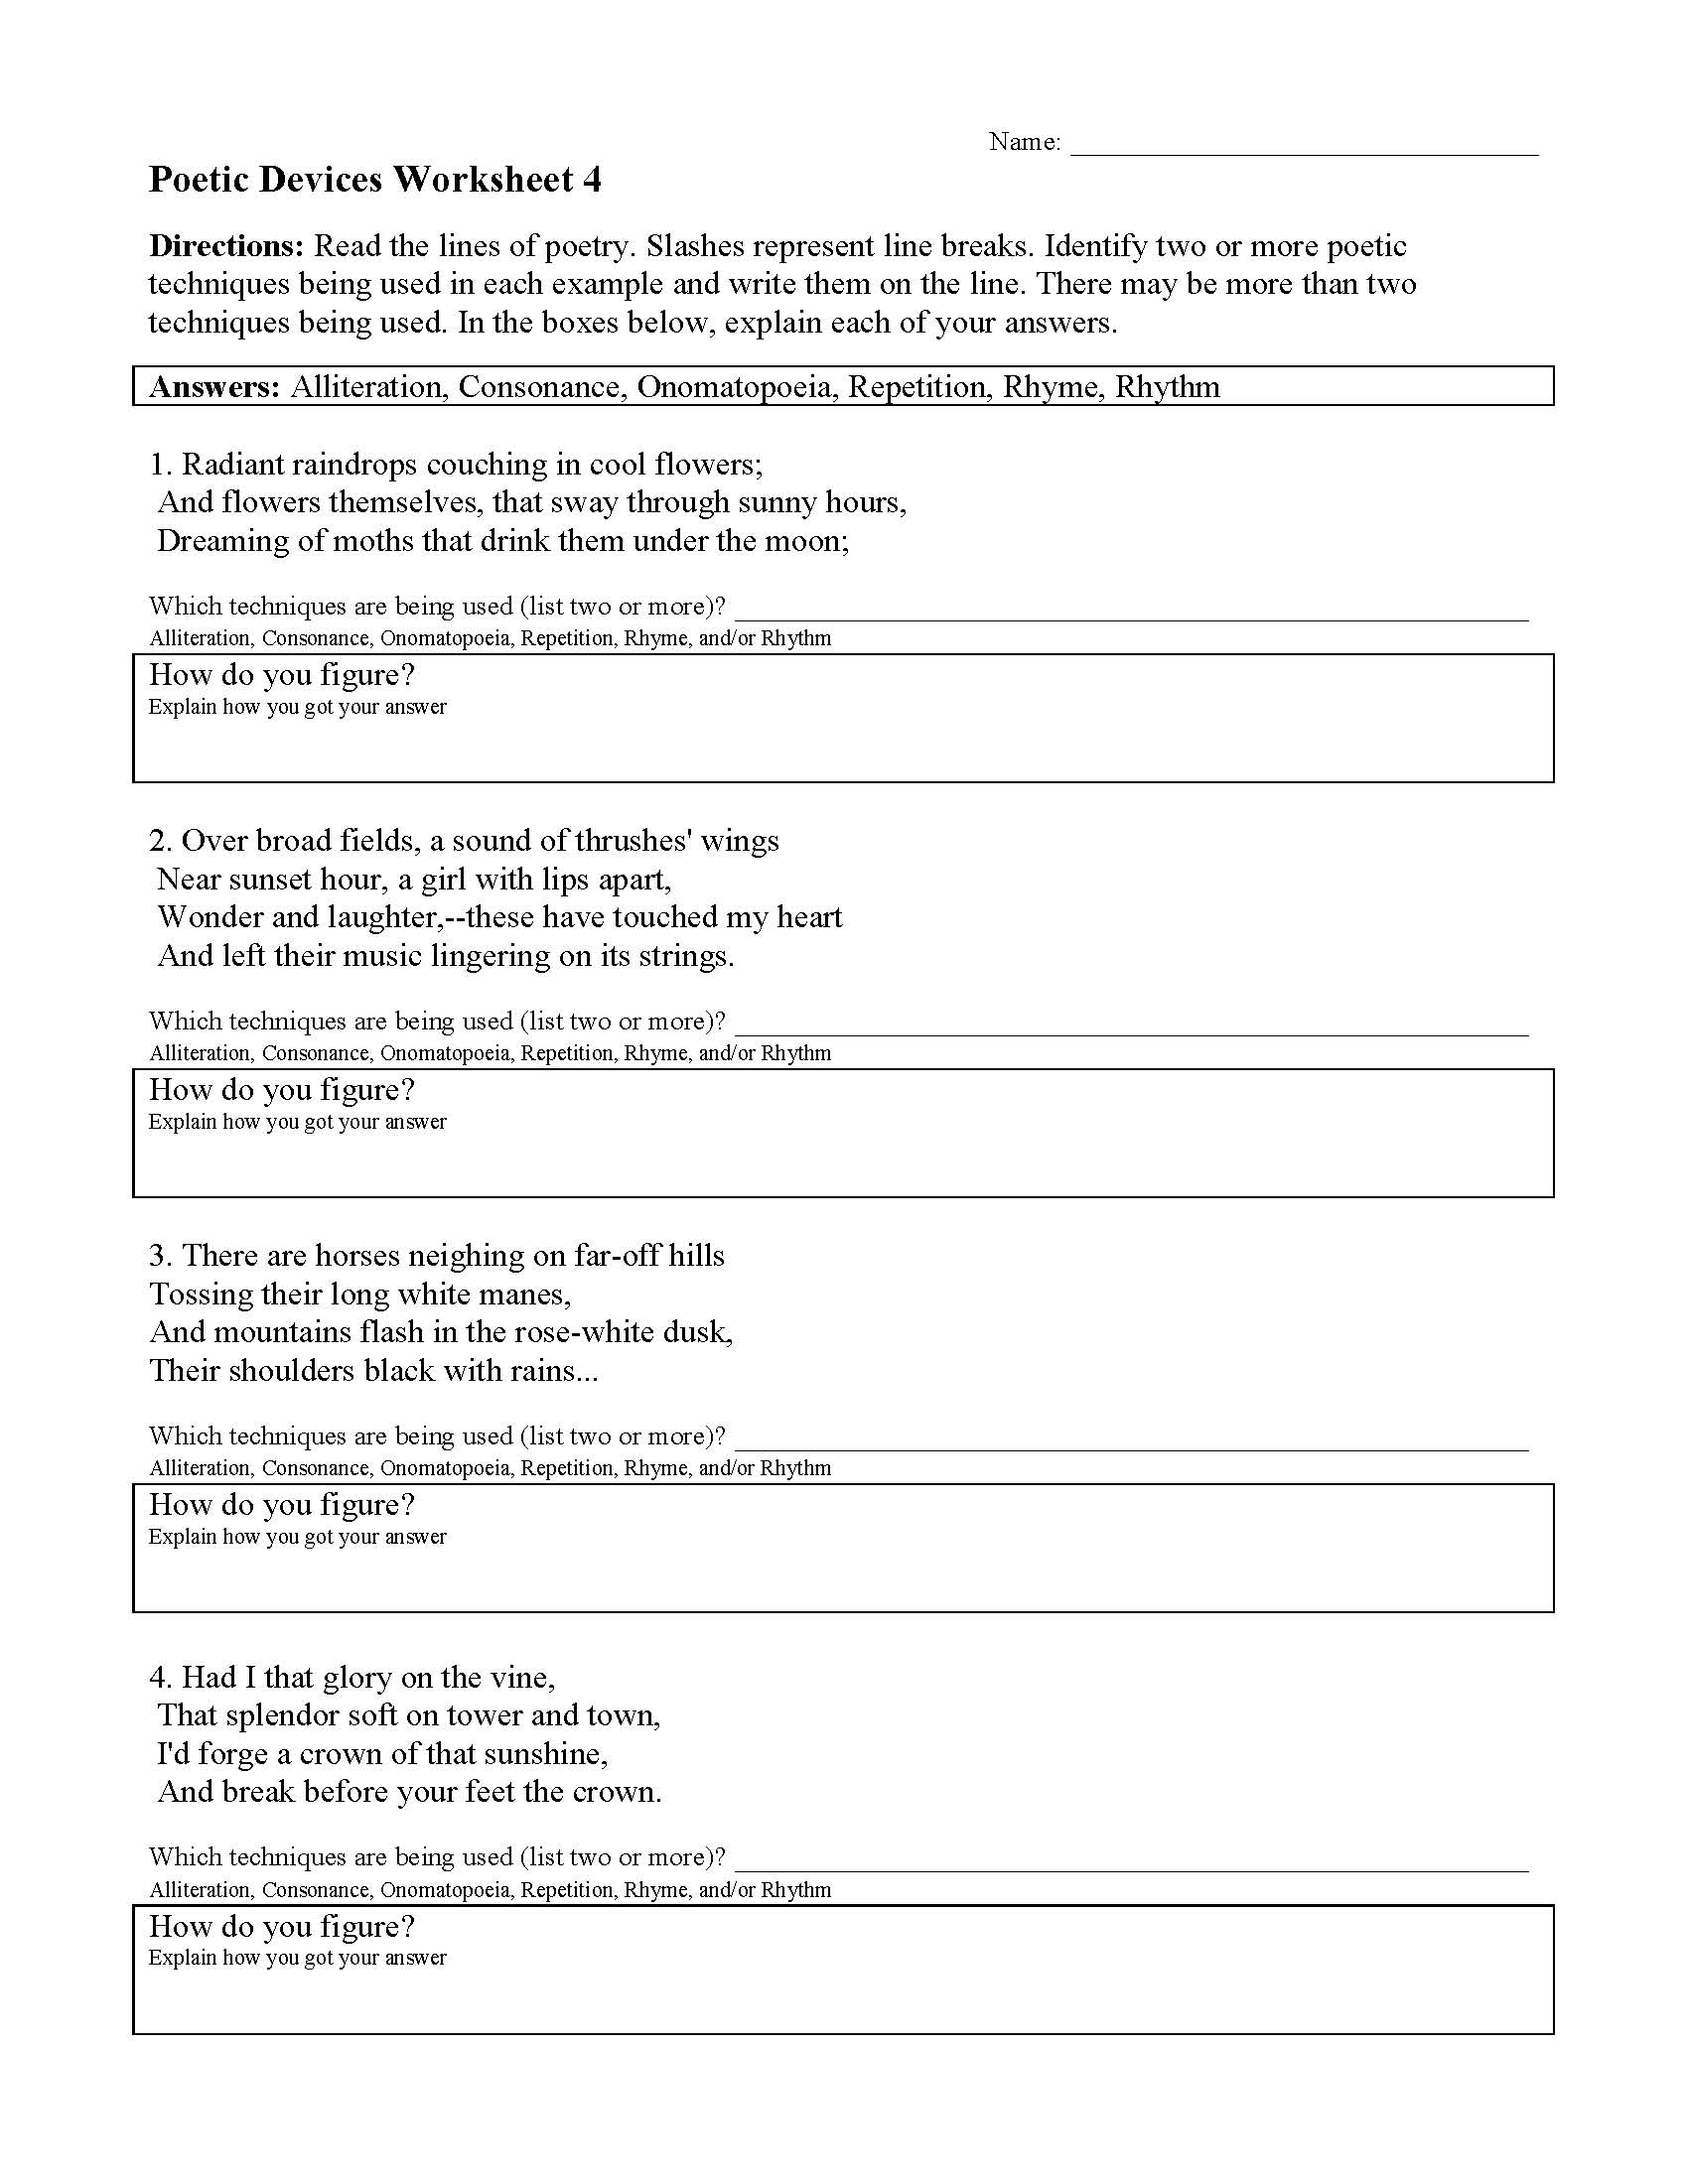 Poetic Devices Worksheet 20  Reading Activity Inside Poetic Devices Worksheet 1